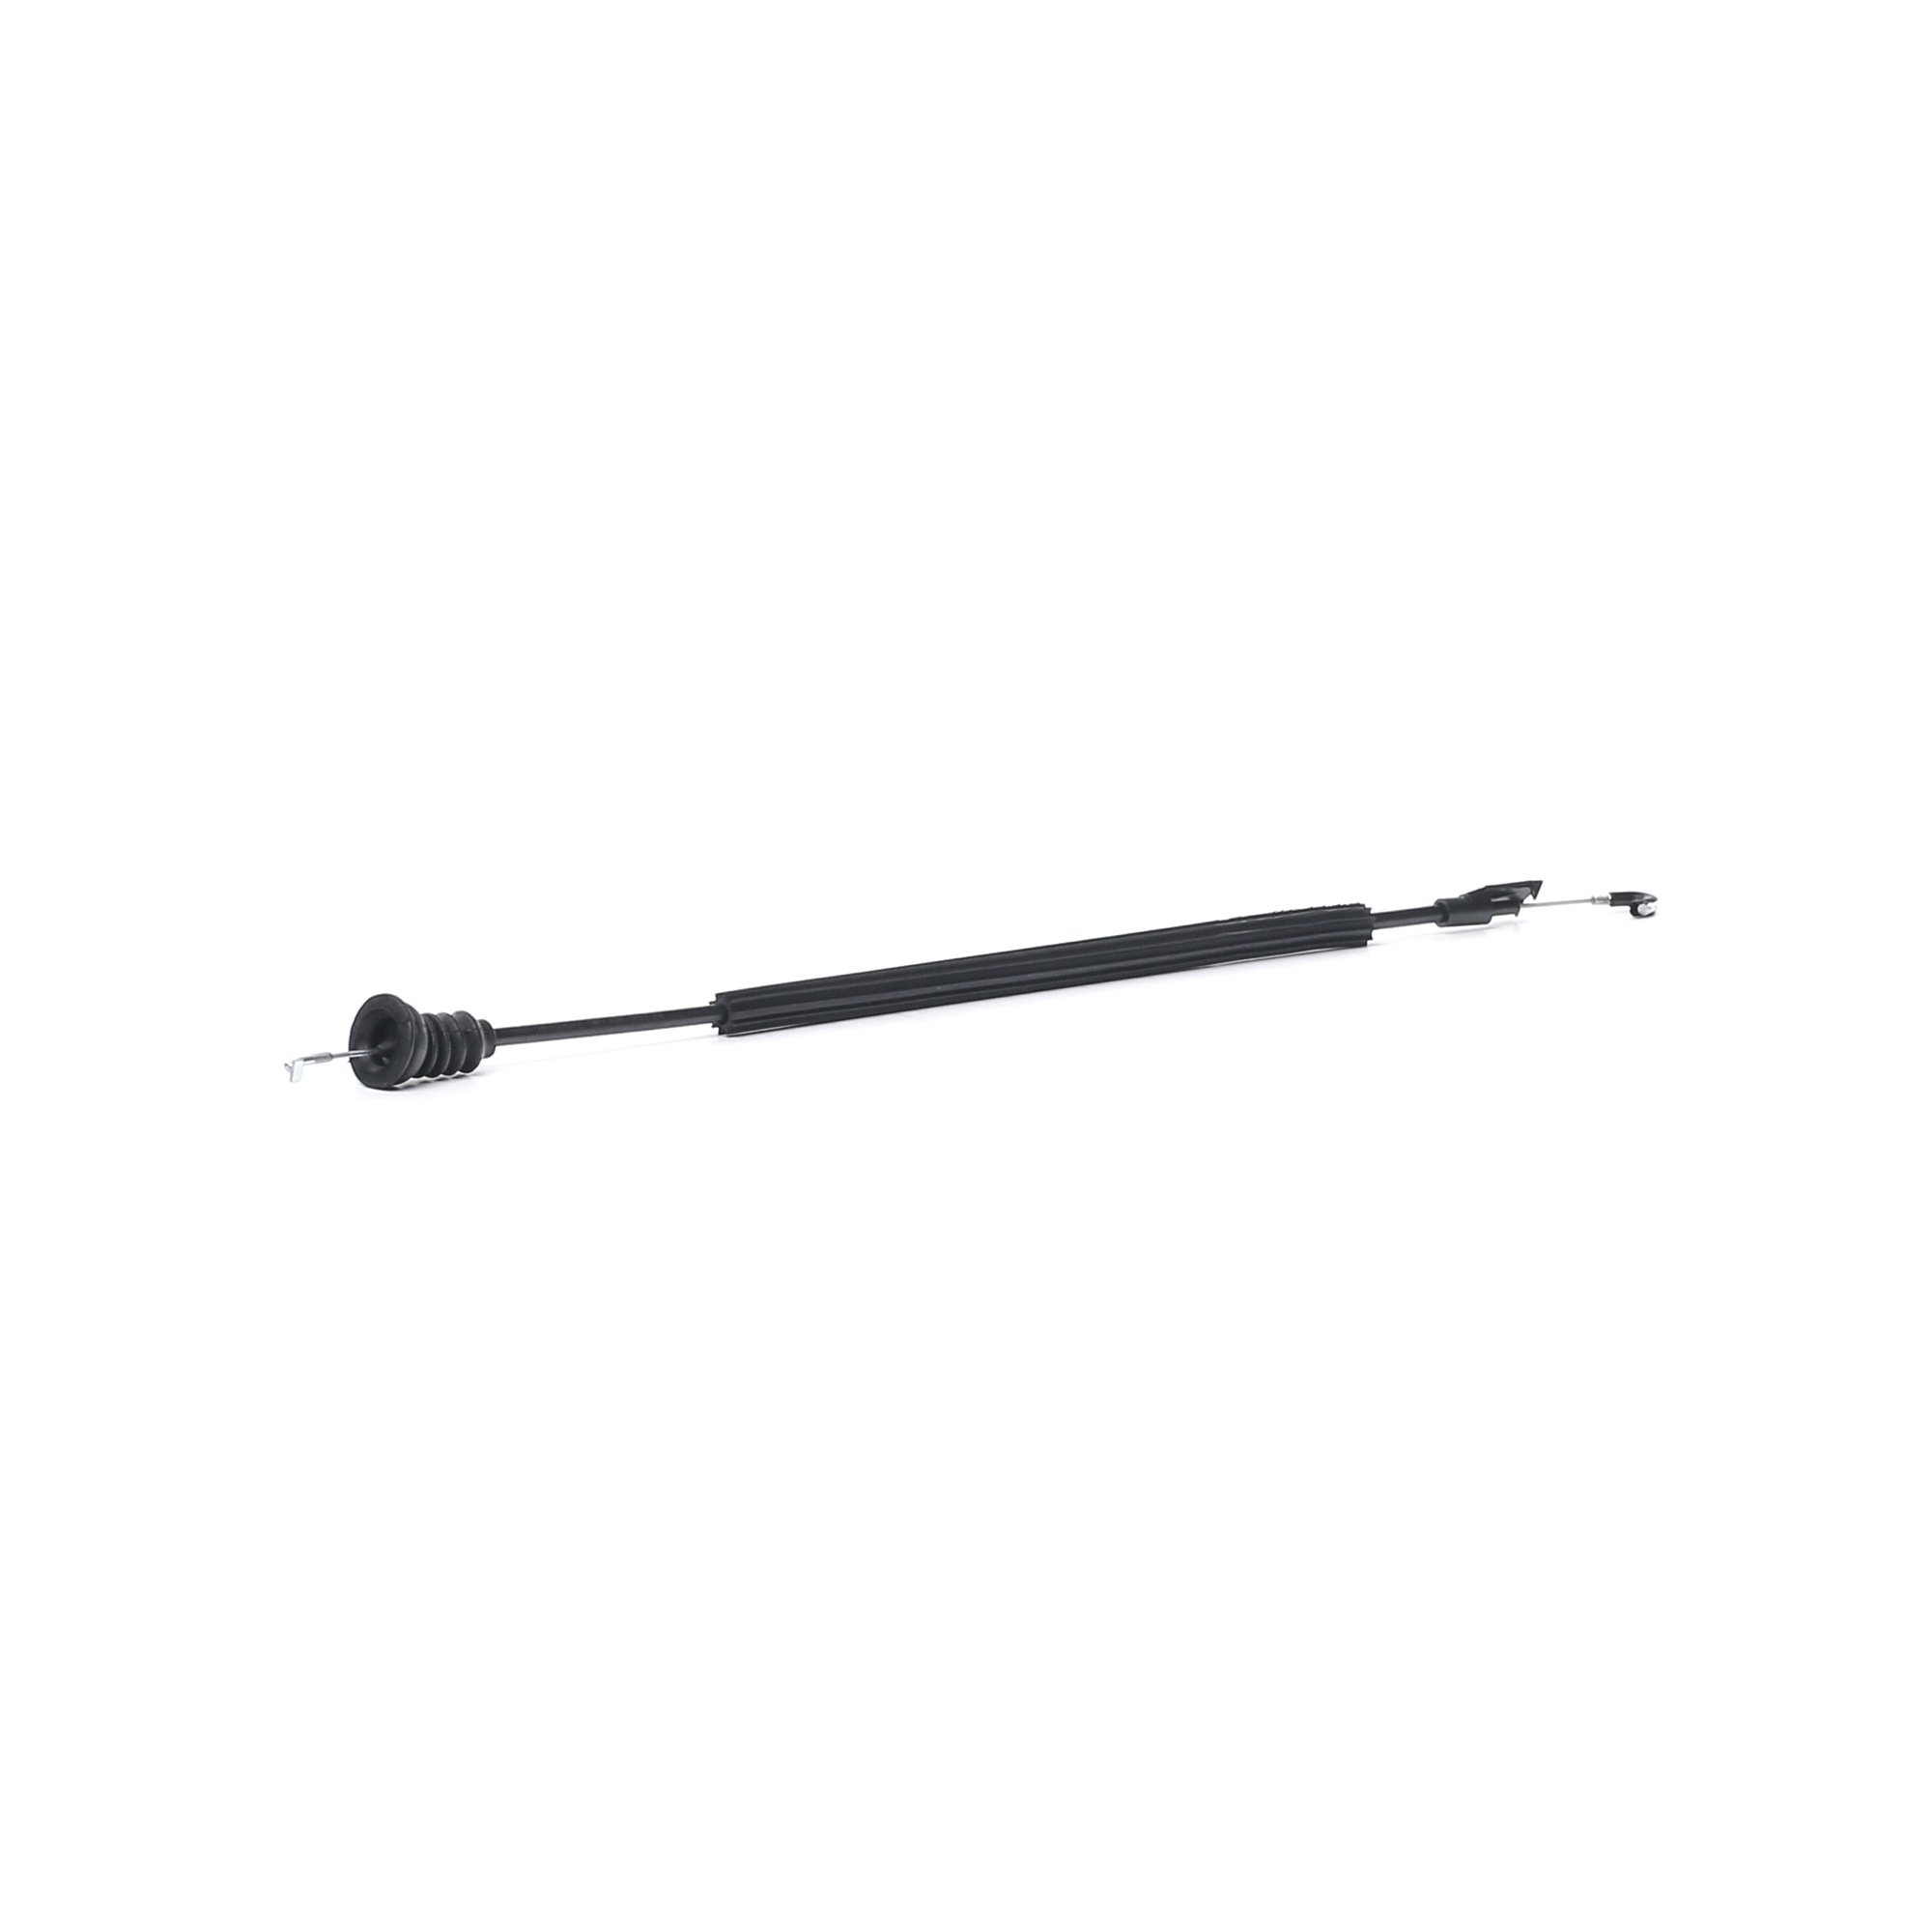 Lexus Cable, door release VIKA 88371687401 at a good price